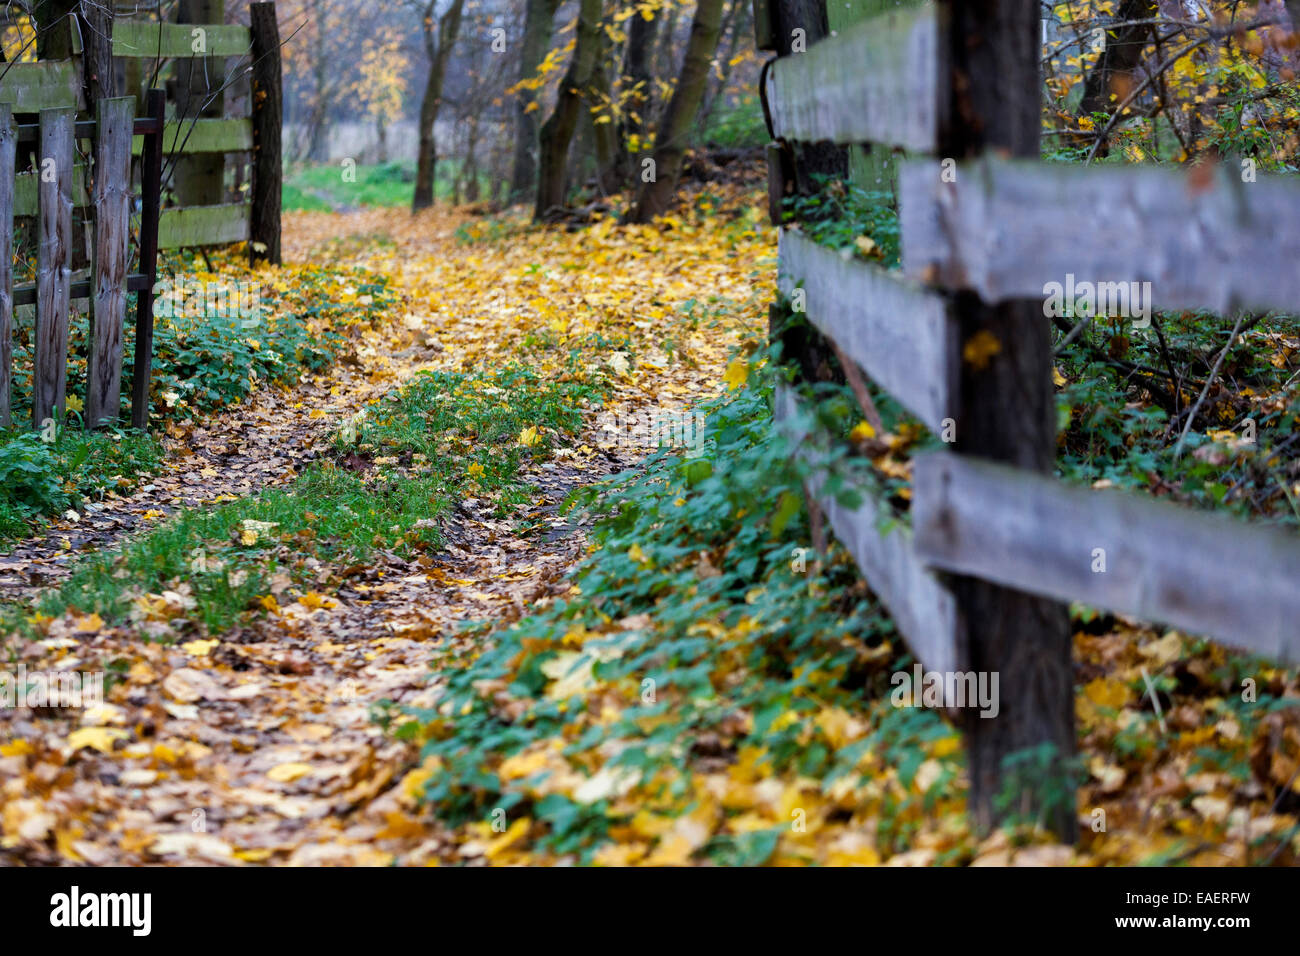 Wooden fence in an autumn landscape Stock Photo